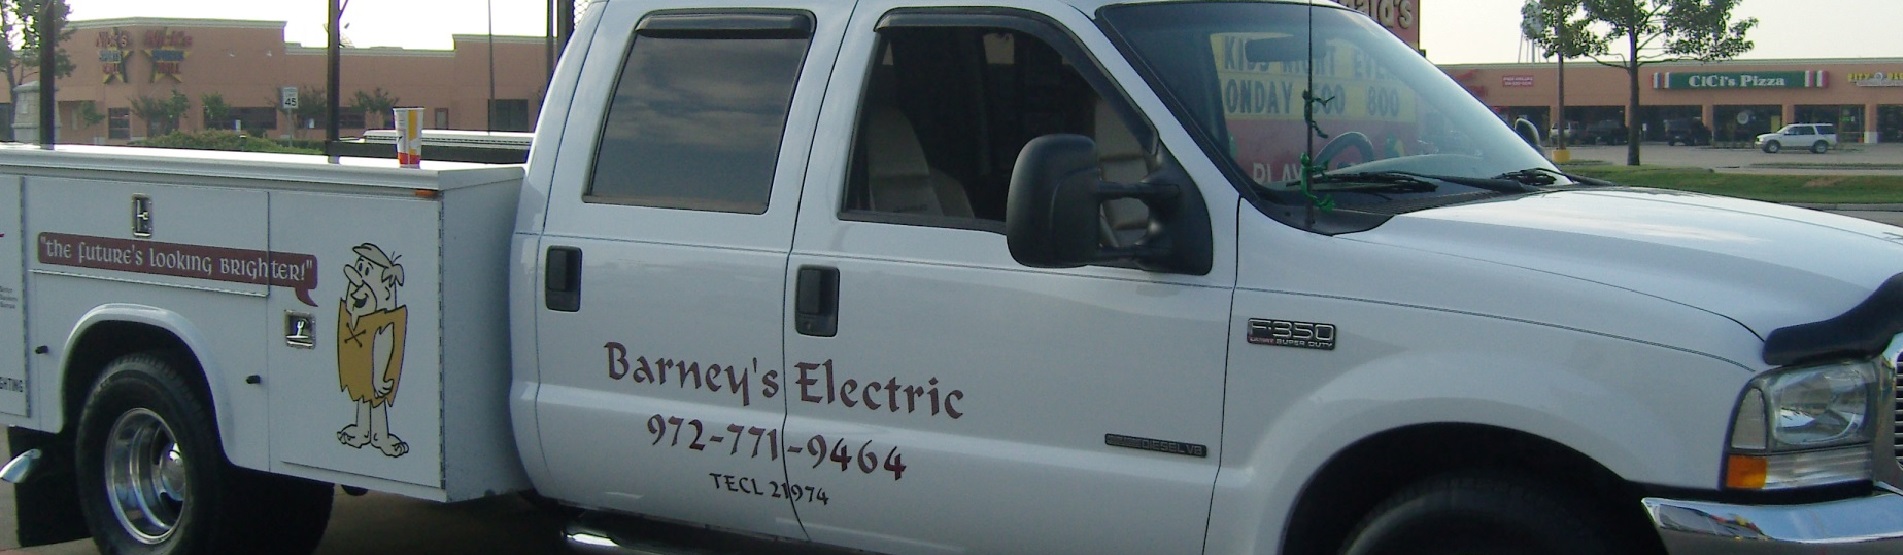 Electrician Fate TX Barney's Electric Full Service Electrician Residential Commercial Retail and New Construction Wiring Repair Installation Service 24 Hour Emergency Services Master Electrician Rockwall Texas